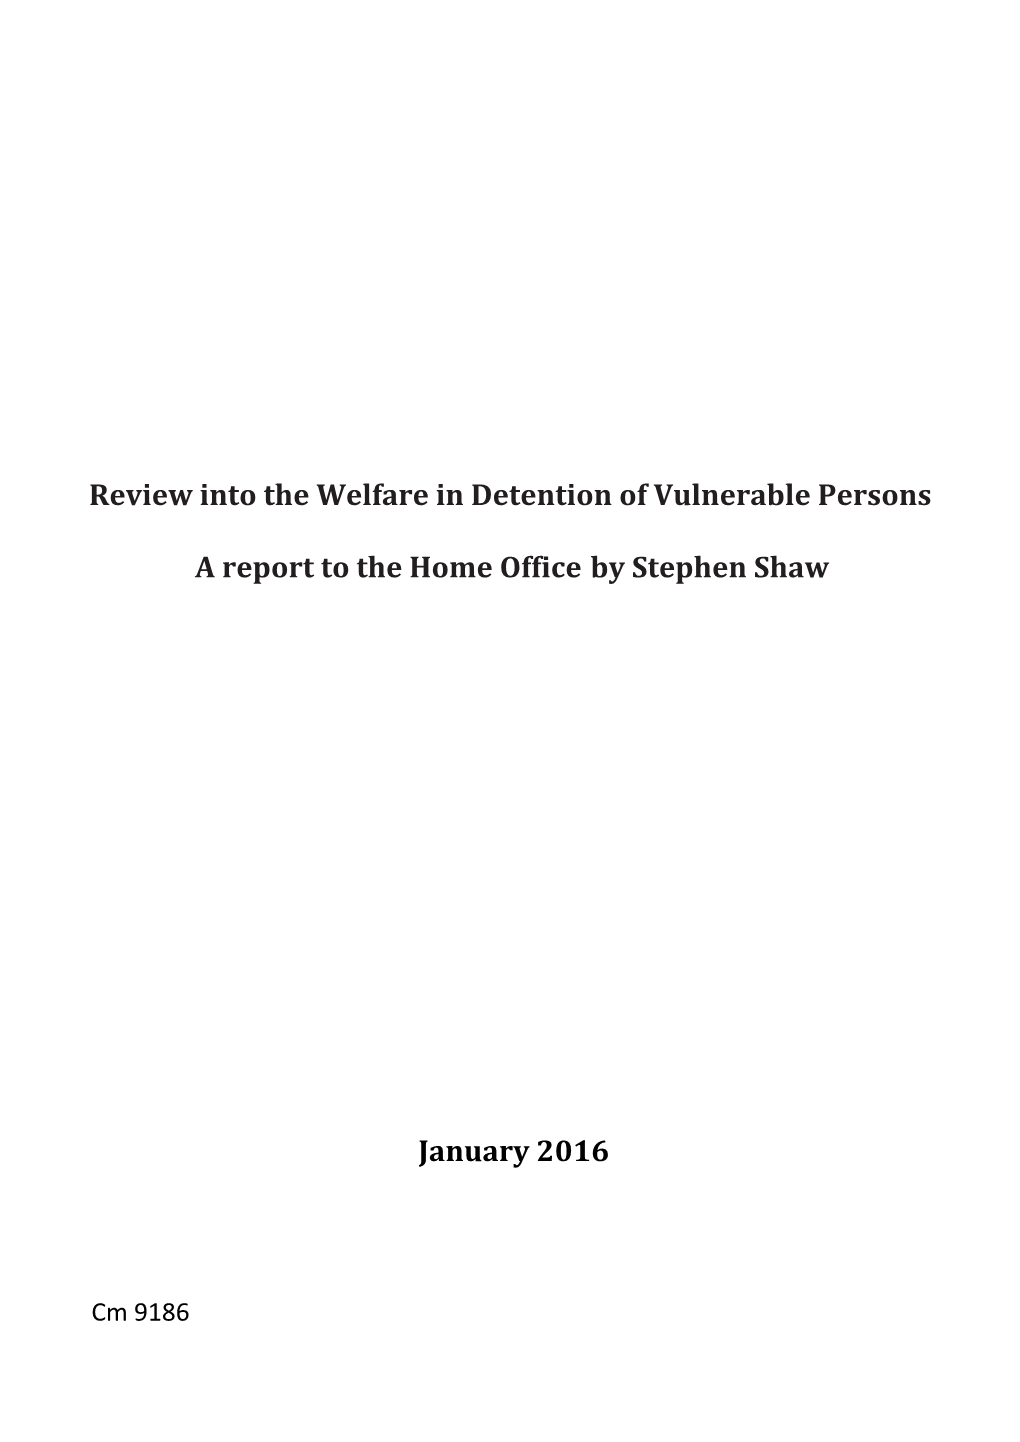 Welfare in Detention of Vulnerable Persons